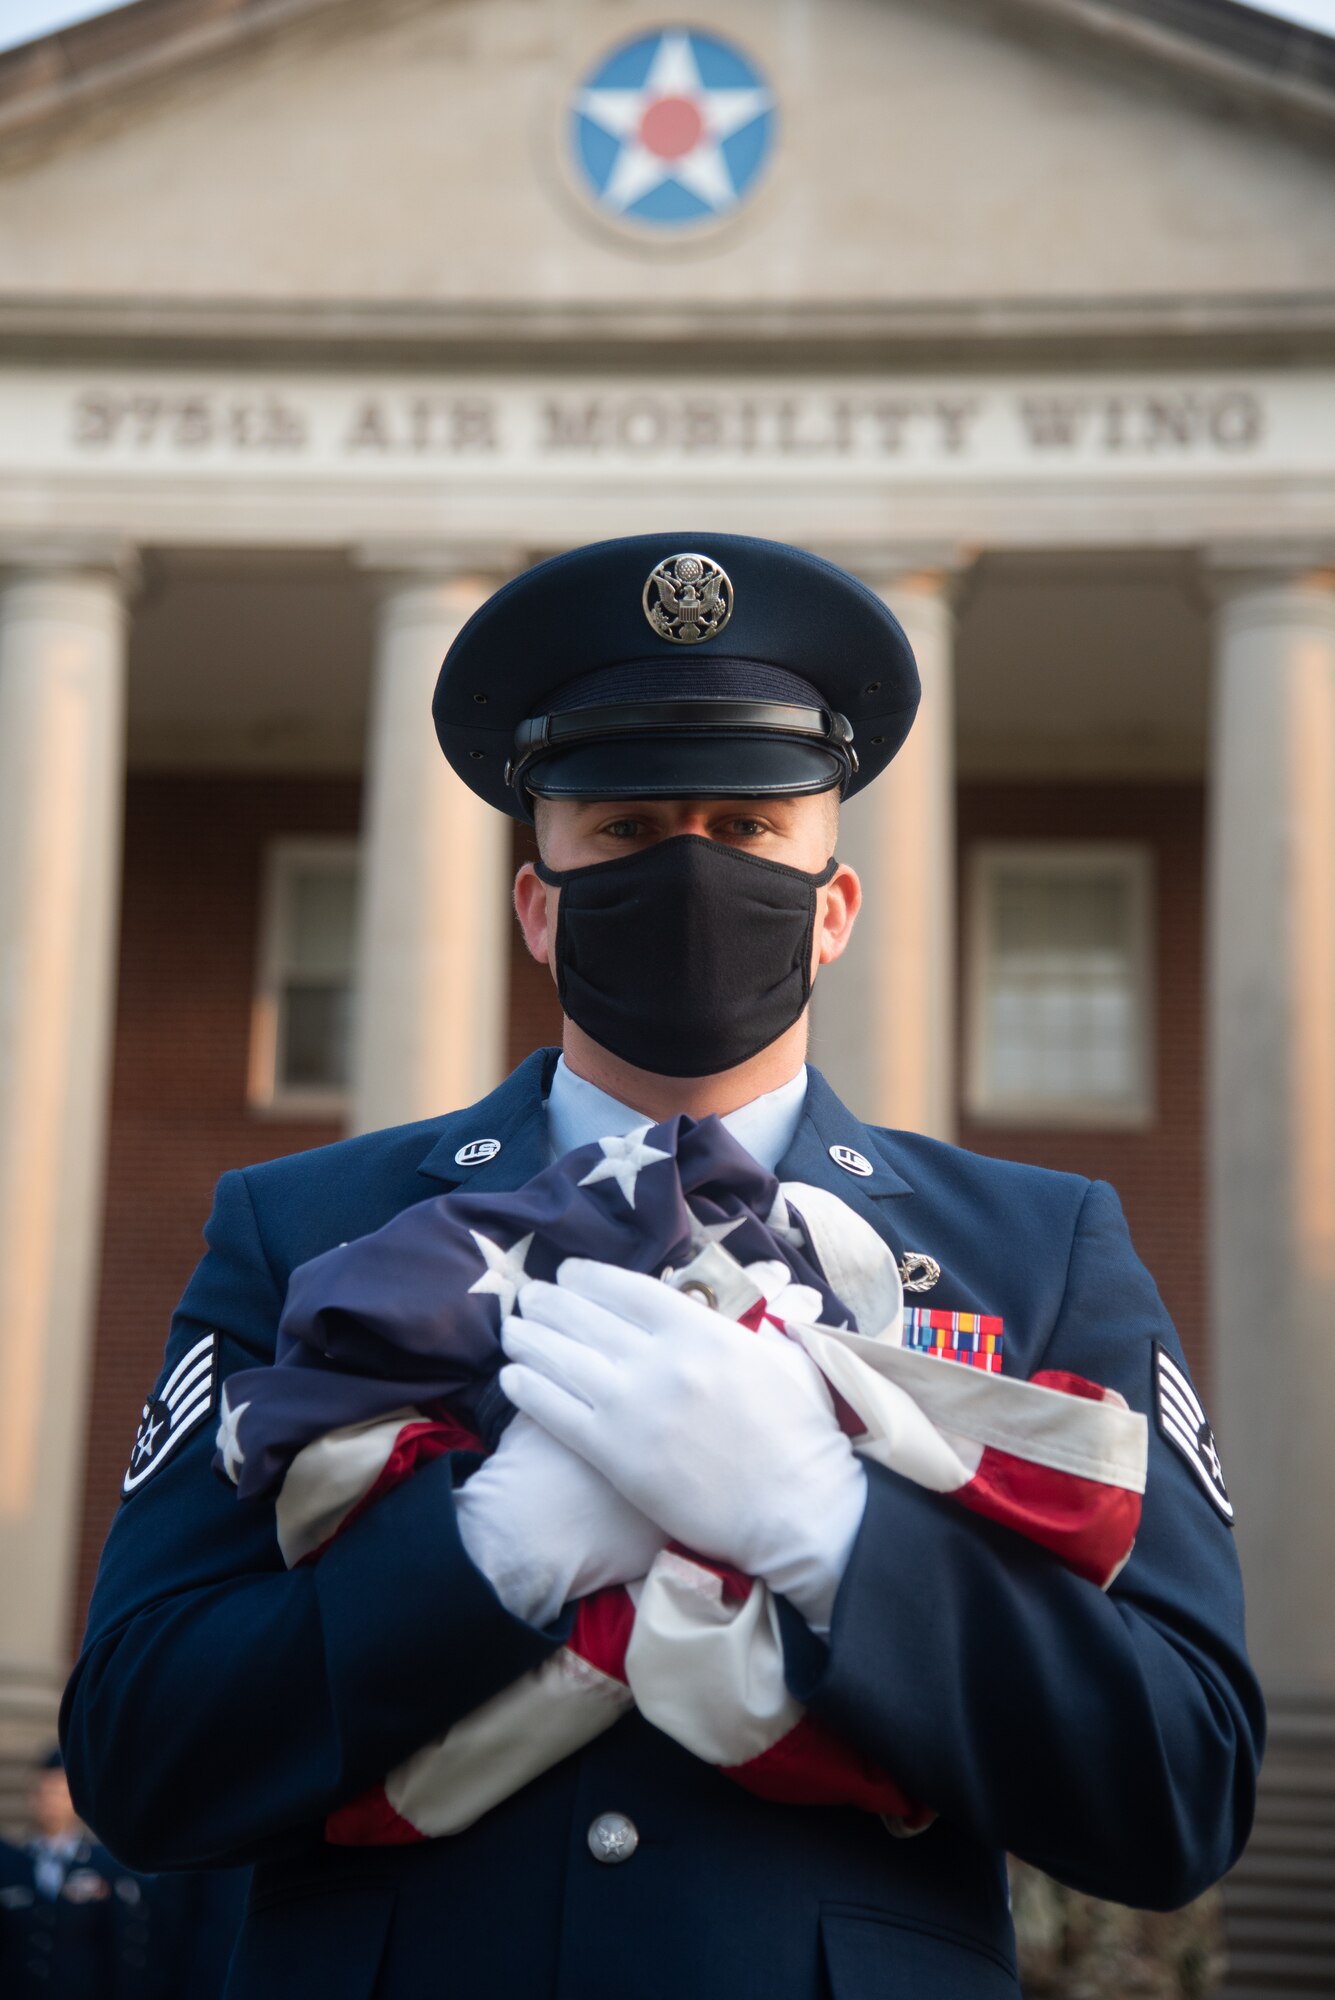 U.S. Air Force Staff Sgt. Daniel Merritt, 375th Civil Engineer Squadron crew chief, holds the U.S. flag before the 9/11 remembrance ceremony begins on Scott Air Force Base, Illinois, September 10, 2021. The ceremony was held to remember the lives lost in the terrorist attacks on September 11, 2001. (U.S. Air Force photo by Airman 1st Class Stephanie Henry)